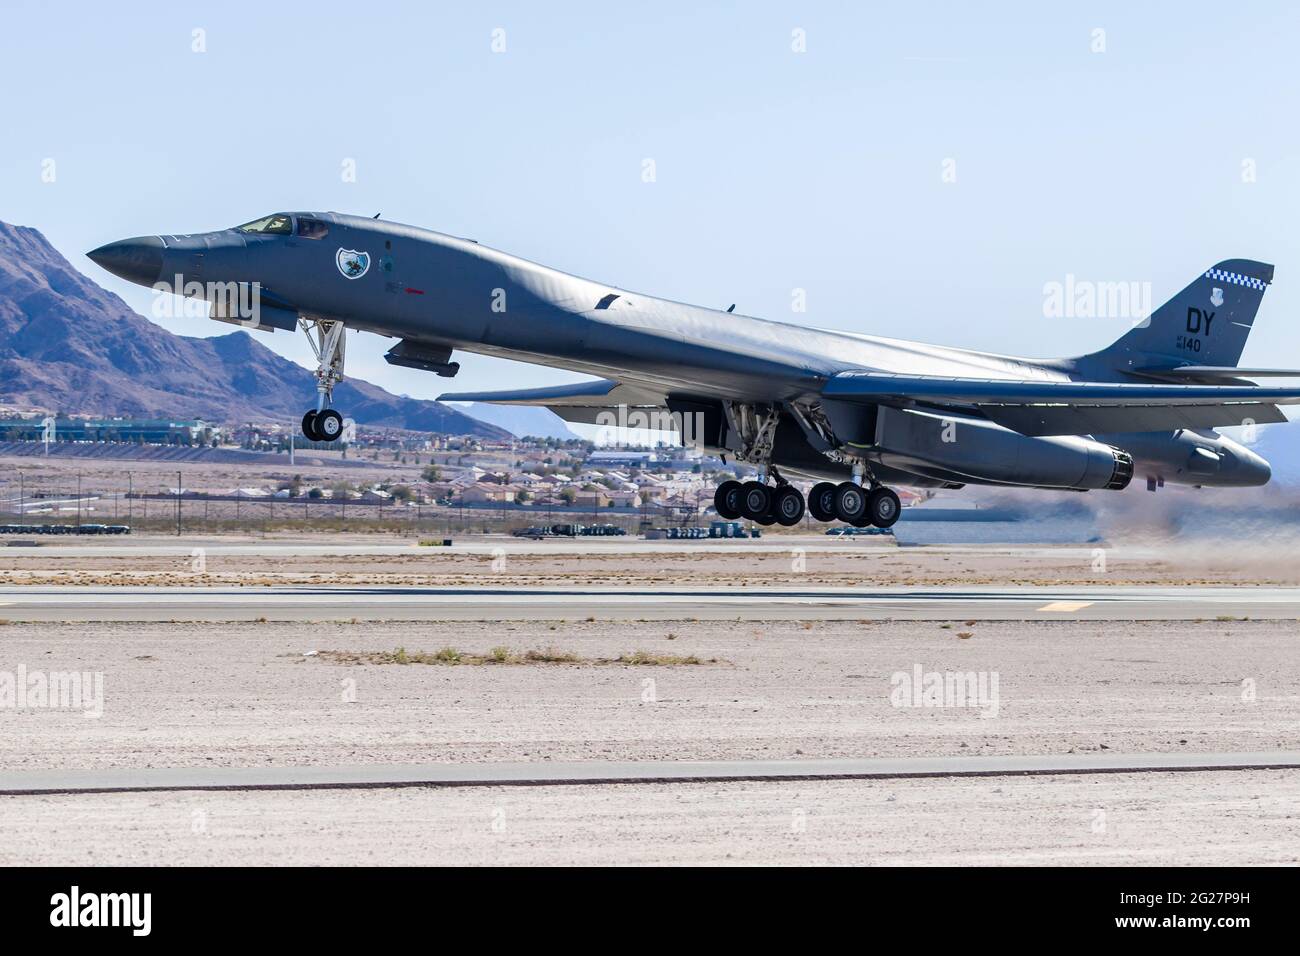 A B-1B Lancer of the U.S. Air Force taking off. Stock Photo